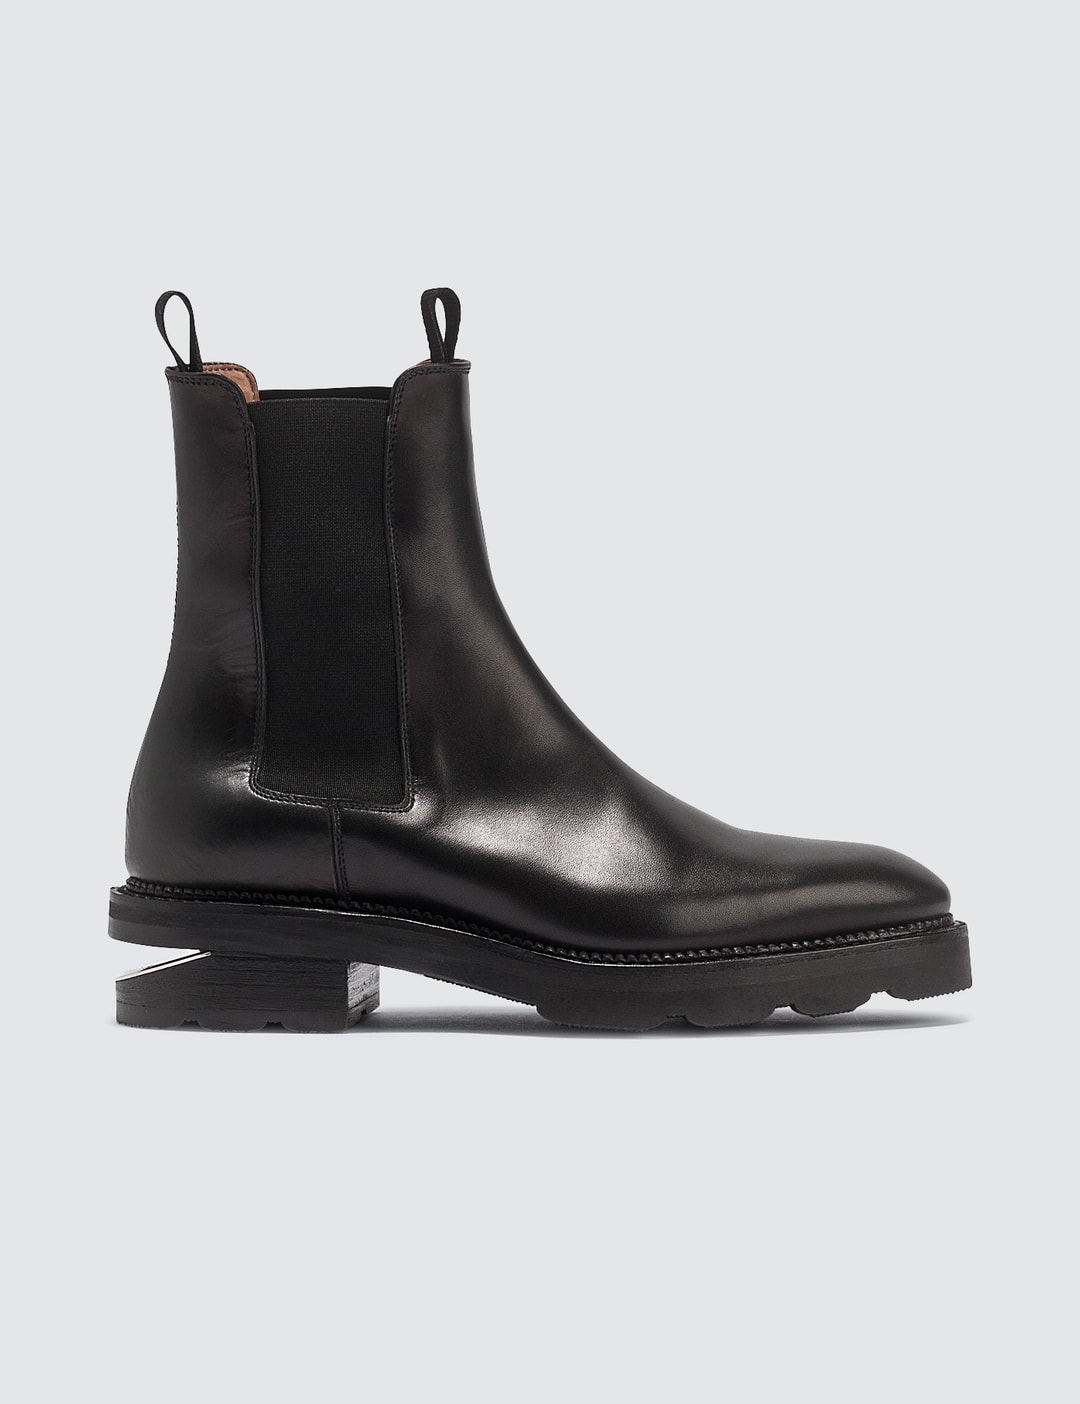 Alexander Wang - Andy Boots | HBX - Globally Curated Fashion and ...